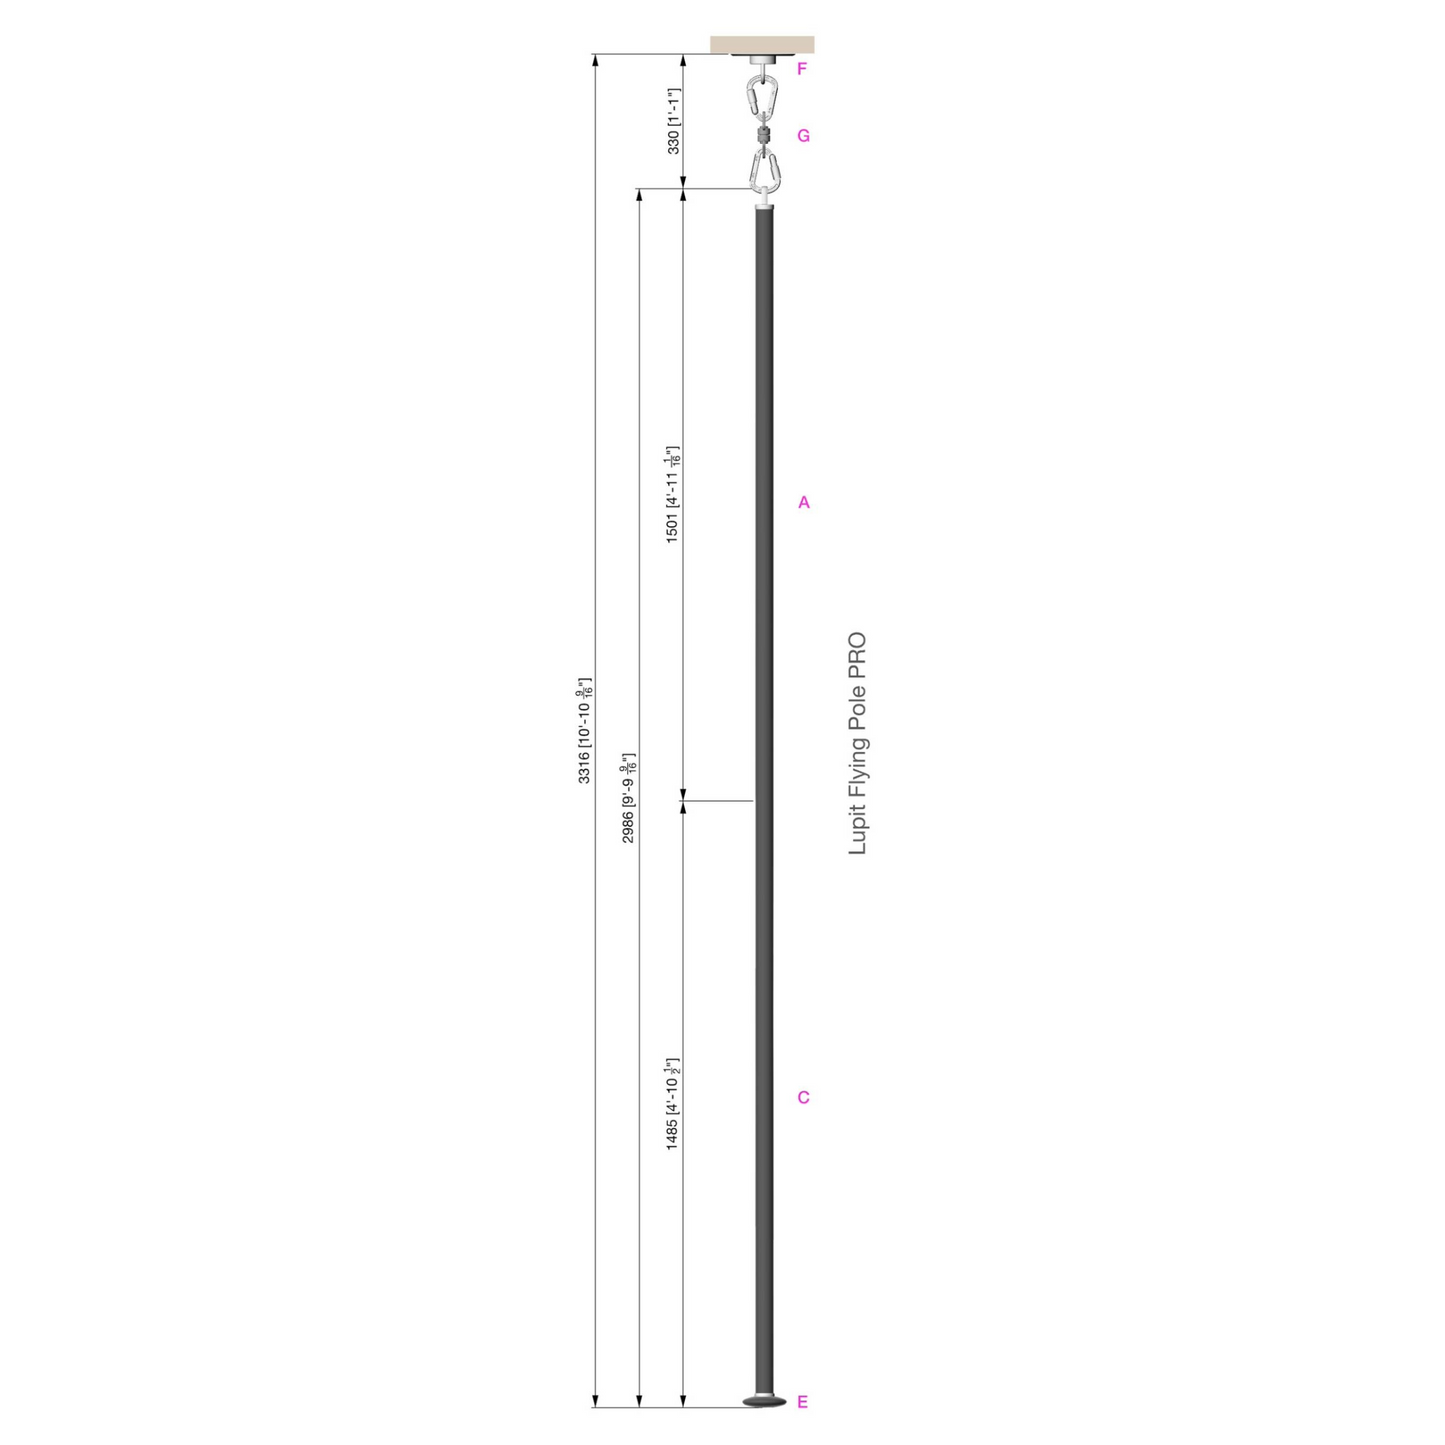 Lupit Aerial Flying Pole Pro | Rubber Black | 2970 mm - 45 mm